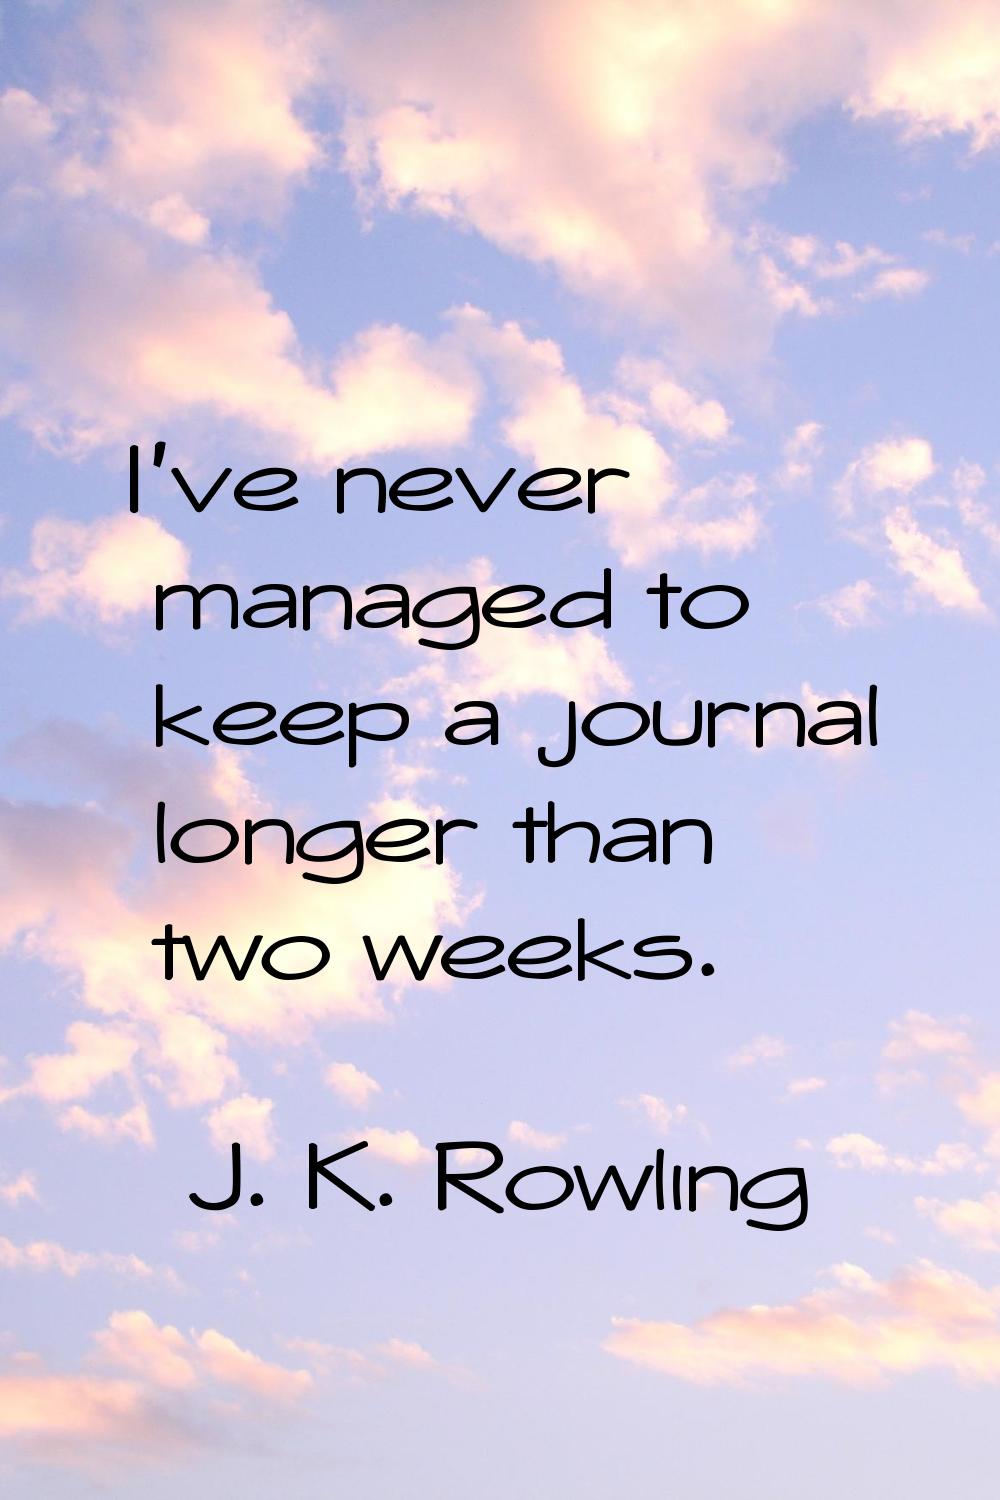 I've never managed to keep a journal longer than two weeks.